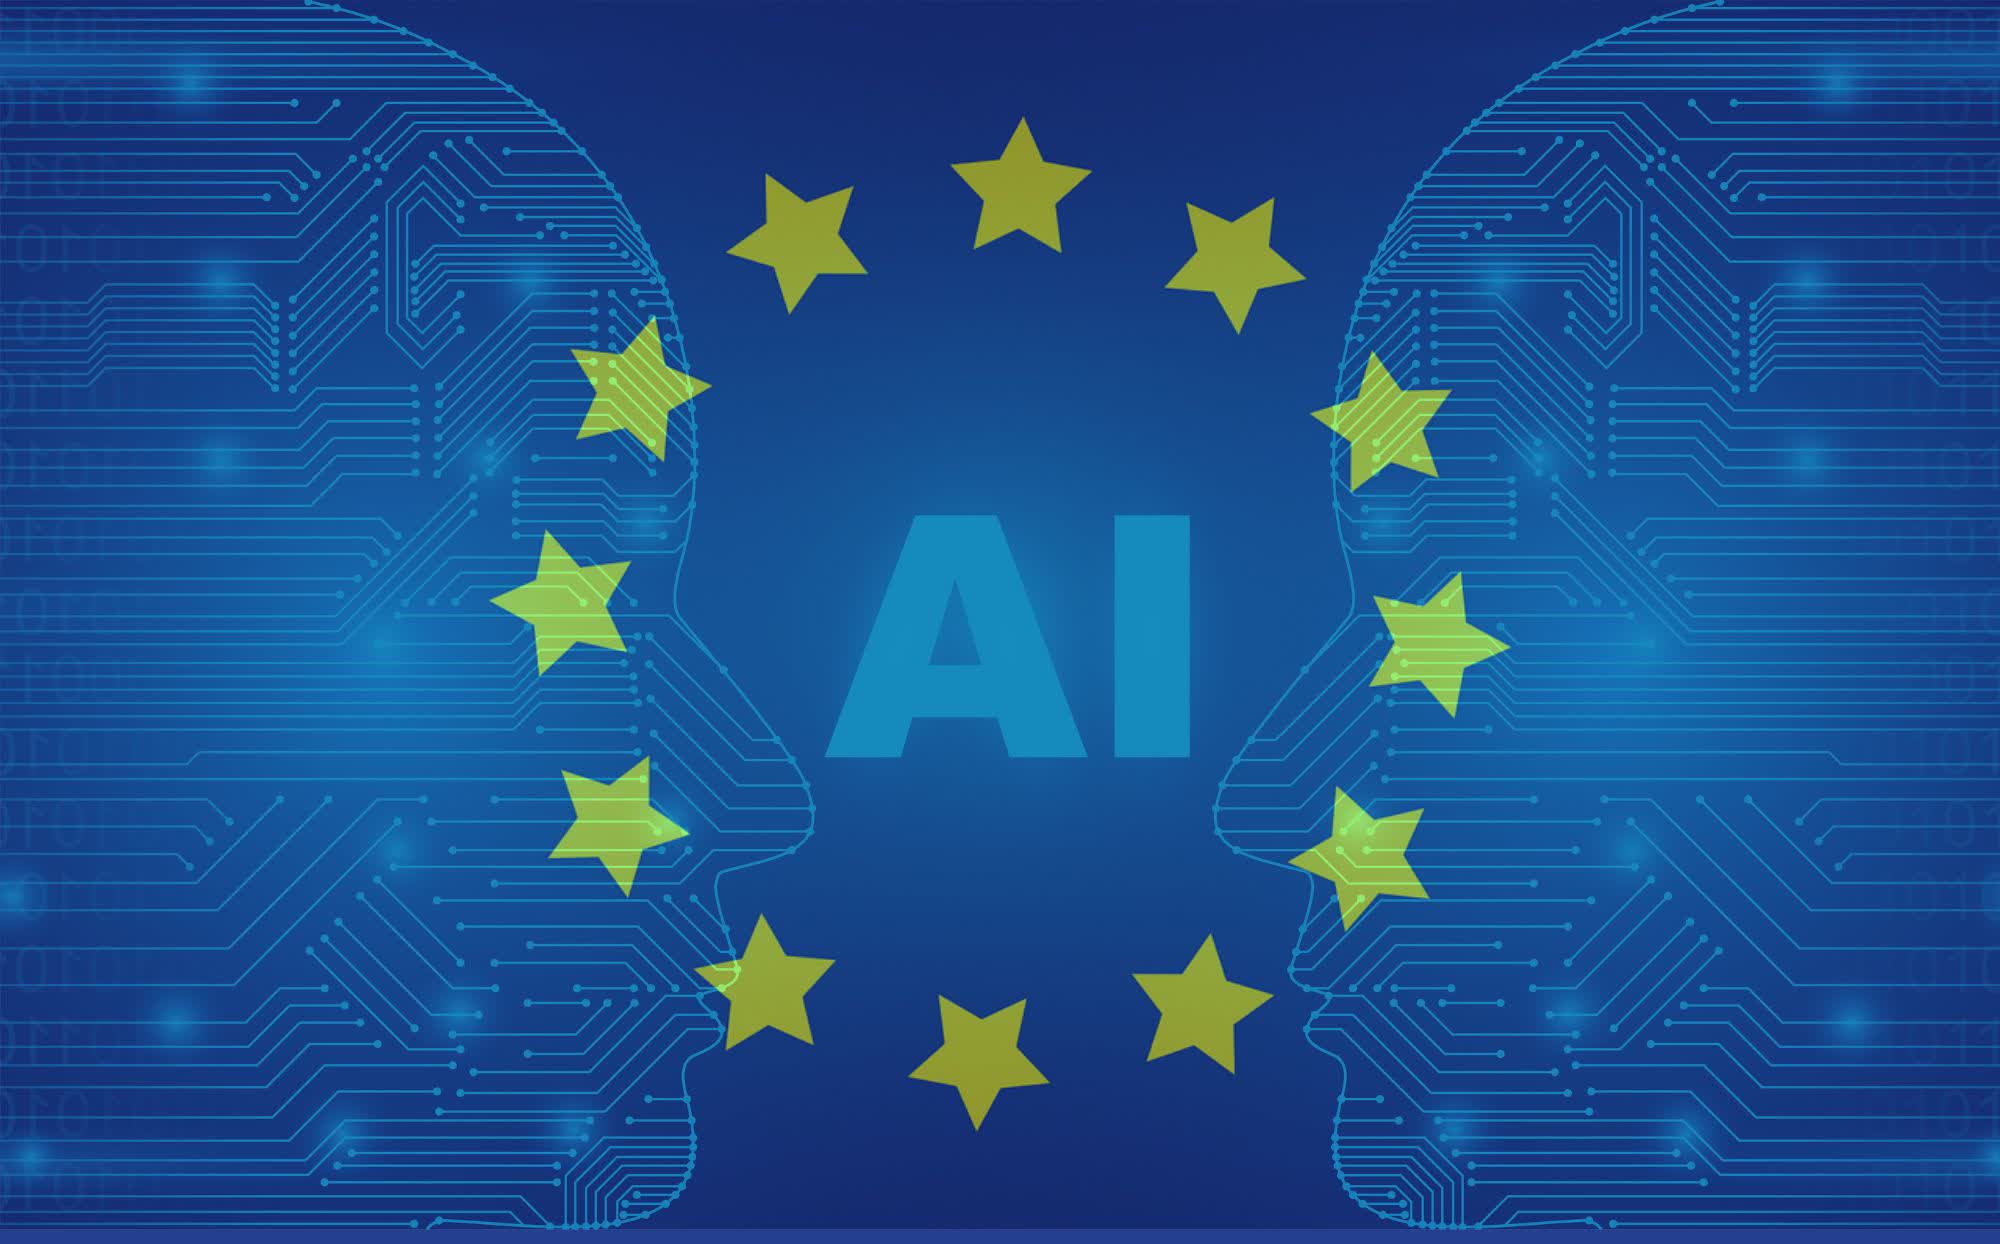 Europe will invest $240 million to test AI systems before they enter the market